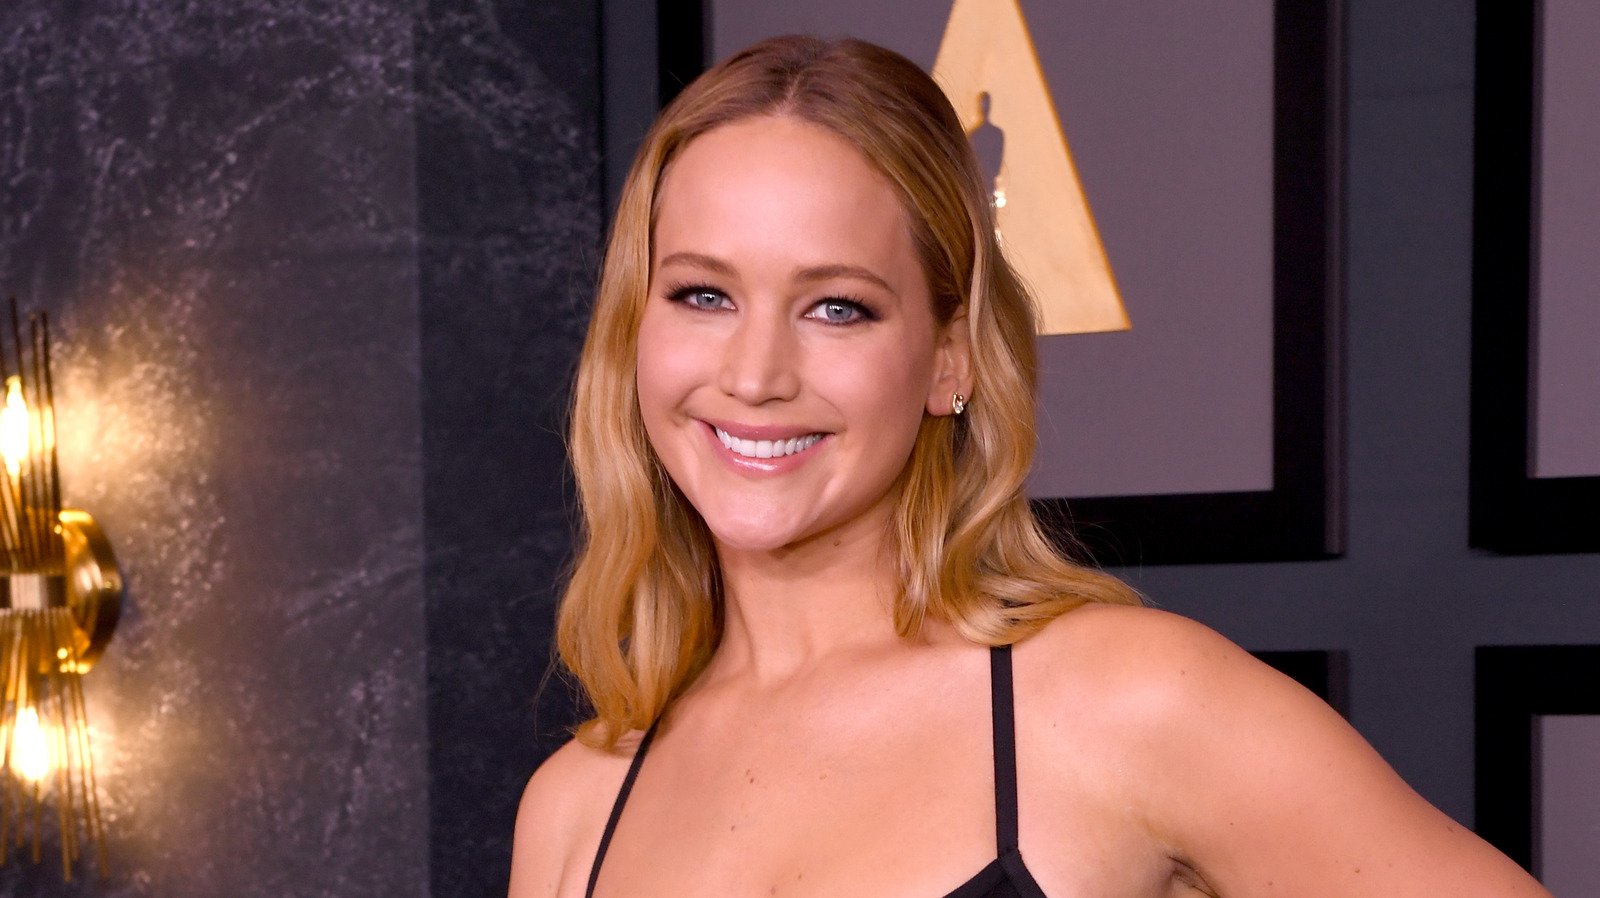 Jennifer Lawrence's 60 Minutes Interview Left Fans Stunned Over Her Story